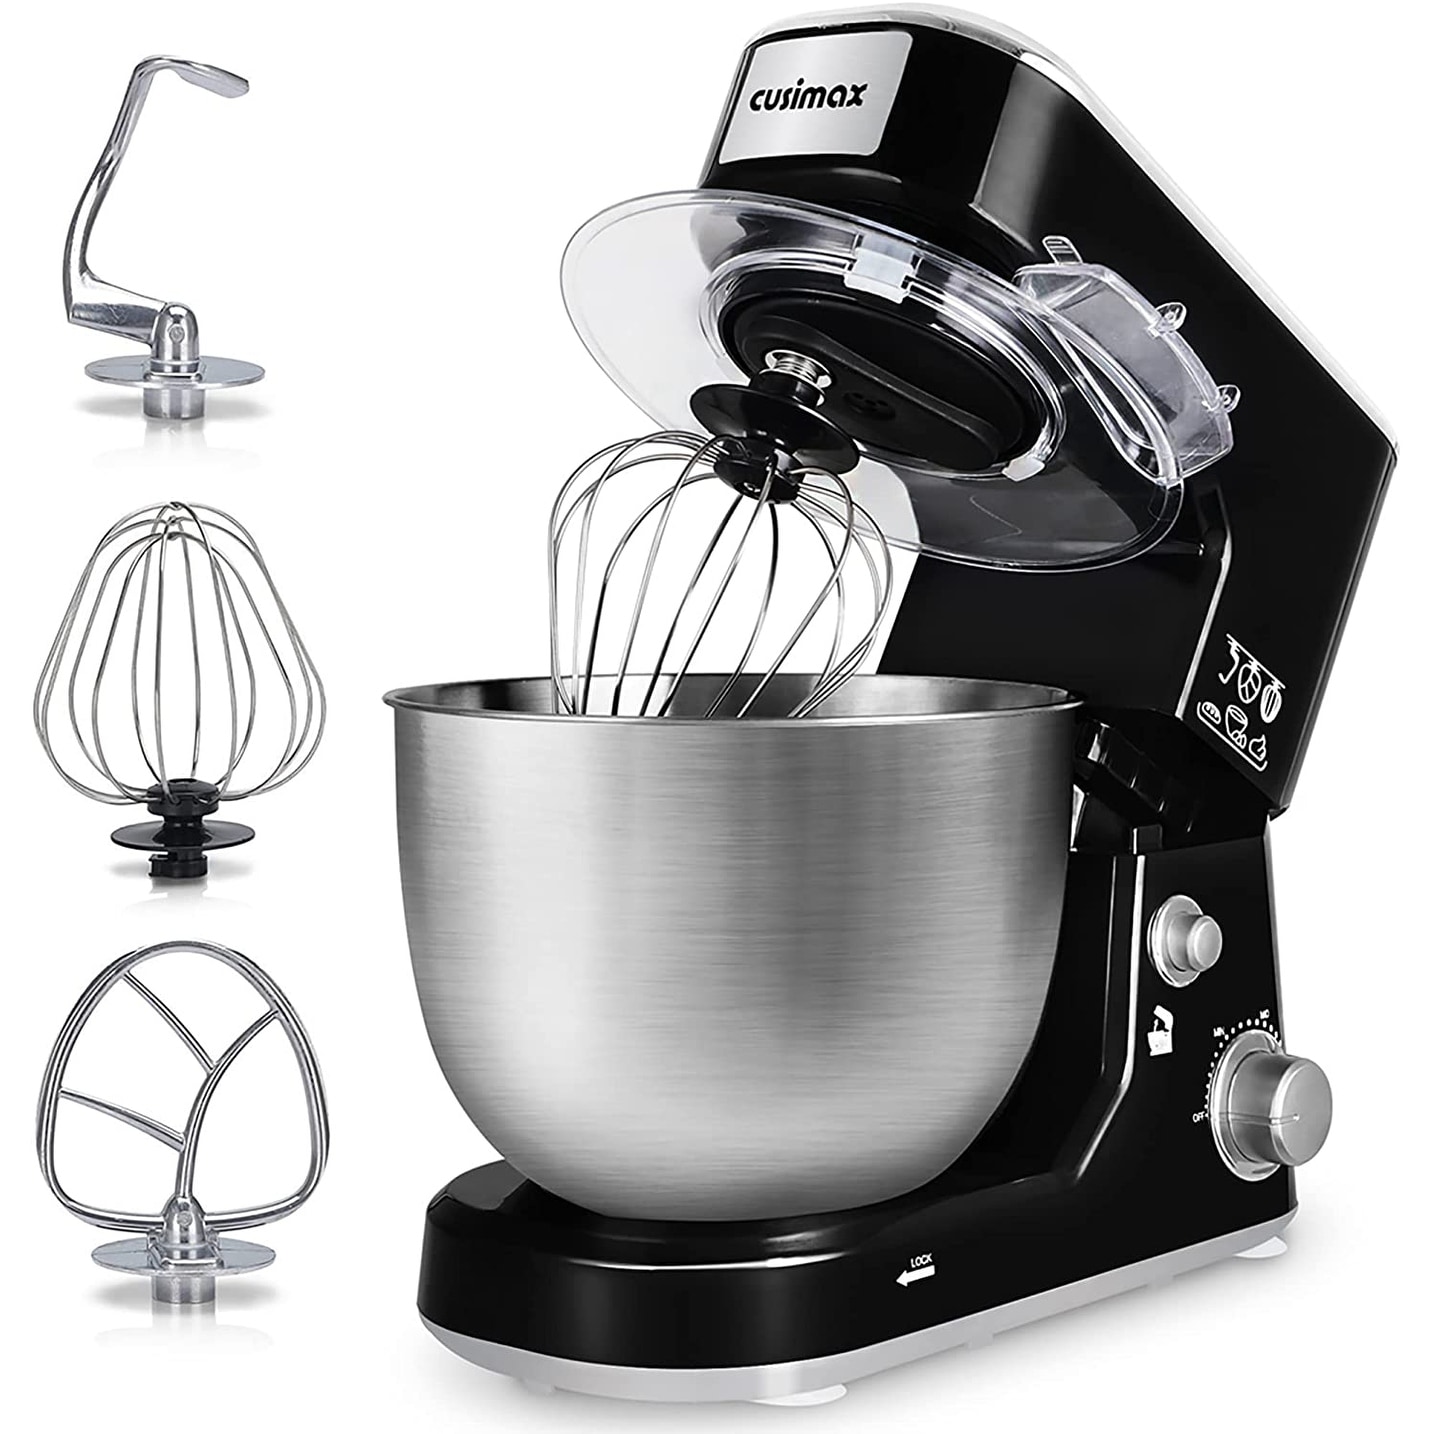 https://ak1.ostkcdn.com/images/products/is/images/direct/c4bc100061b1ed2435aa254375f9ef947037125b/Stand-Mixer%2C-Dough-Mixer-Tilt-Head-Electric-Mixer-with-5-Quart-Stainless-Steel-Bowl.jpg